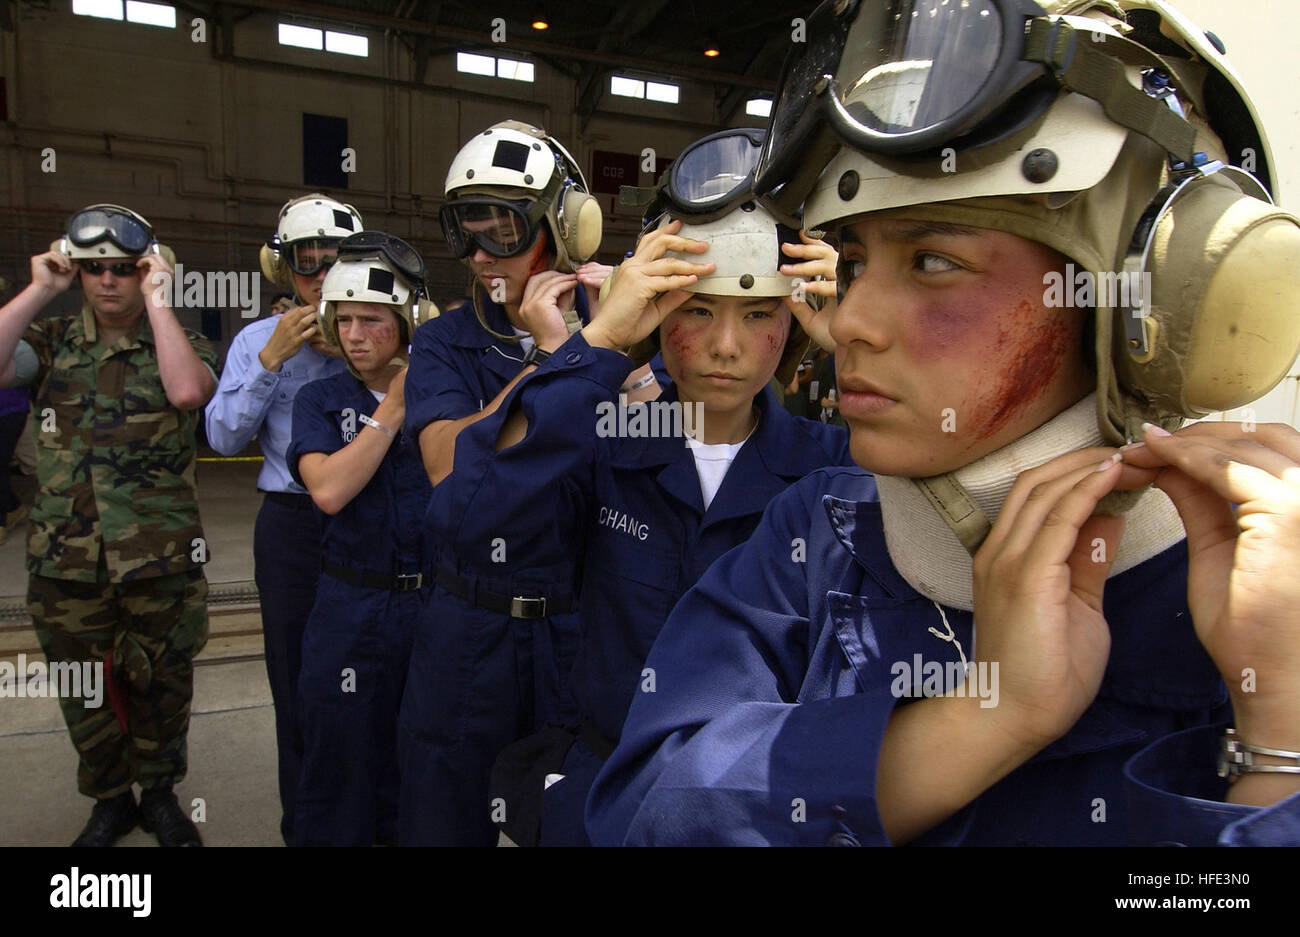 050526-F-6655M-164 Pensacola, Fla (May 26, 2005) - Navy ÒA SchoolÓ students assigned to Naval Air Station Pensacola, Fla., don safety helmets and goggles before loading into a CH-3 transport helicopter during exercise Lifesaver 2005. The exercise is based on an oil refinery explosion involving more than 200 patients and medical airlift from three different branches of the armed forces. Military personnel join local, state and federal agencies in Lifesaver 2005, a major Homeland Security/National Disaster Medical System exercise being conducted in eight states. U.S. Air Force photo by Tech. Sgt Stock Photo